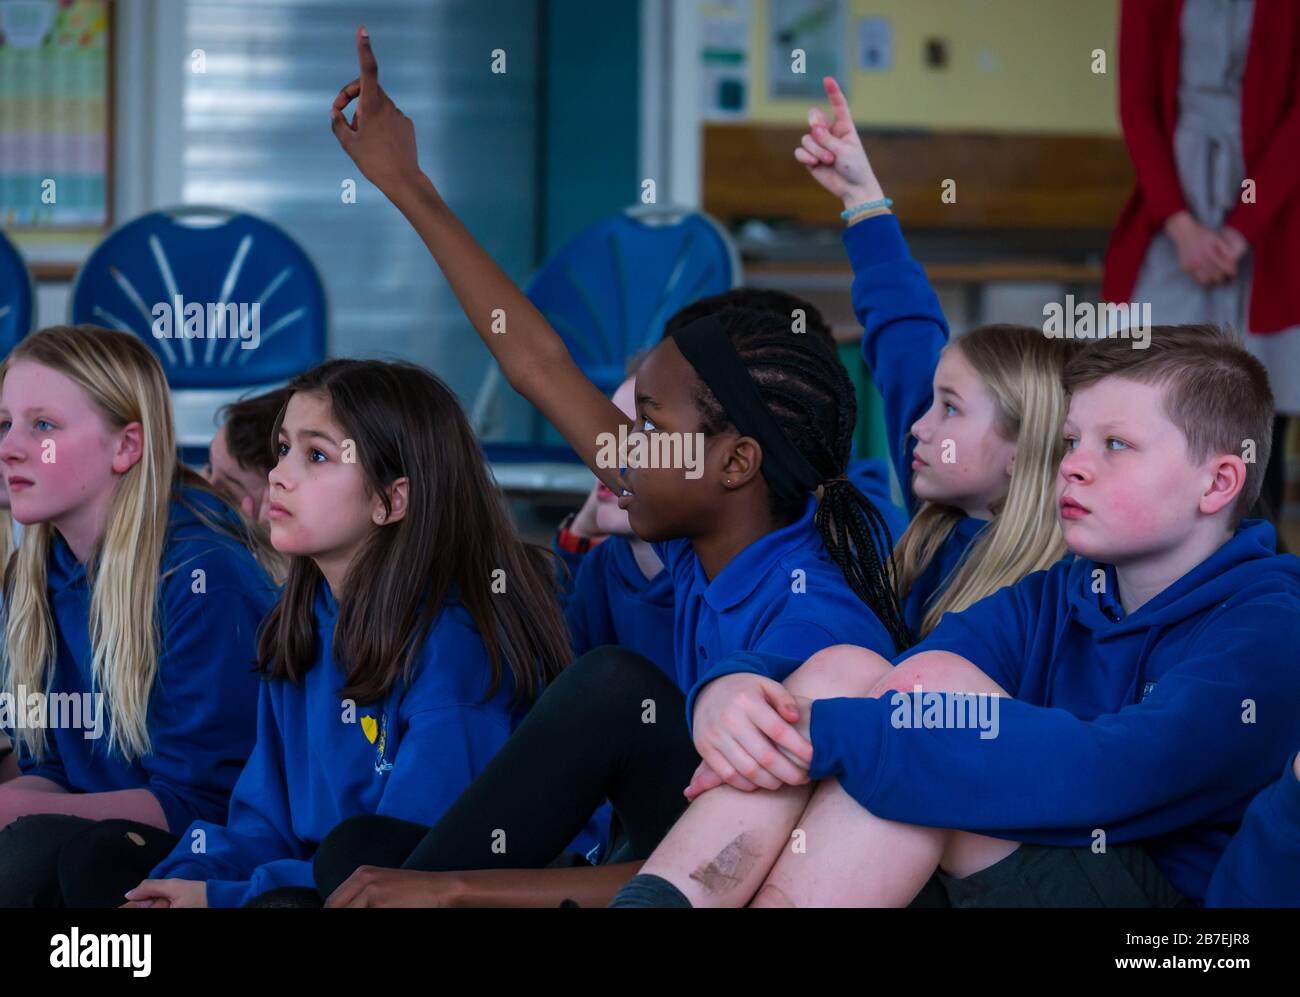 School children at Davidsons Mains primary school with a black girl raising her hand to answer a question, Edinburgh, Scotland, UK Stock Photo